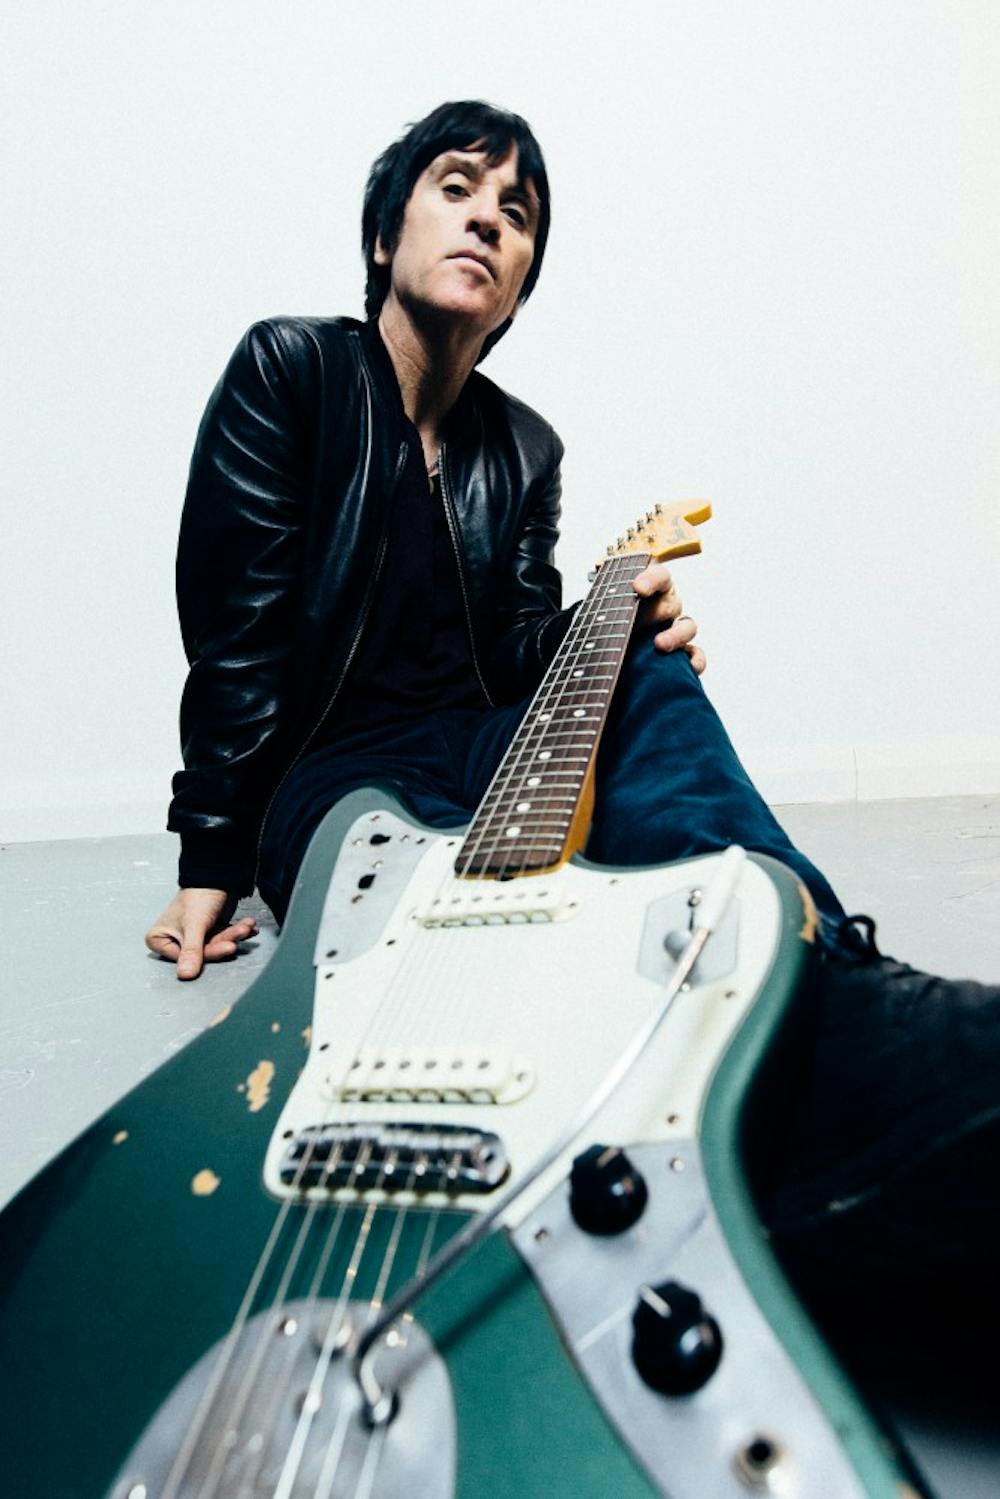 <p>From The Smiths to Modest Mouse, Johnny Marr has left a lasting impression in popular music. "I feel an almost weird responsibility to honor the guitar within indie rock," Marr said. Currently on tour in support of his third solo album, "Call the Comet," <em>The Spectrum </em>spoke&nbsp;with the legendary guitarist concerning his past, present and future, as well as his influences.&nbsp;</p>